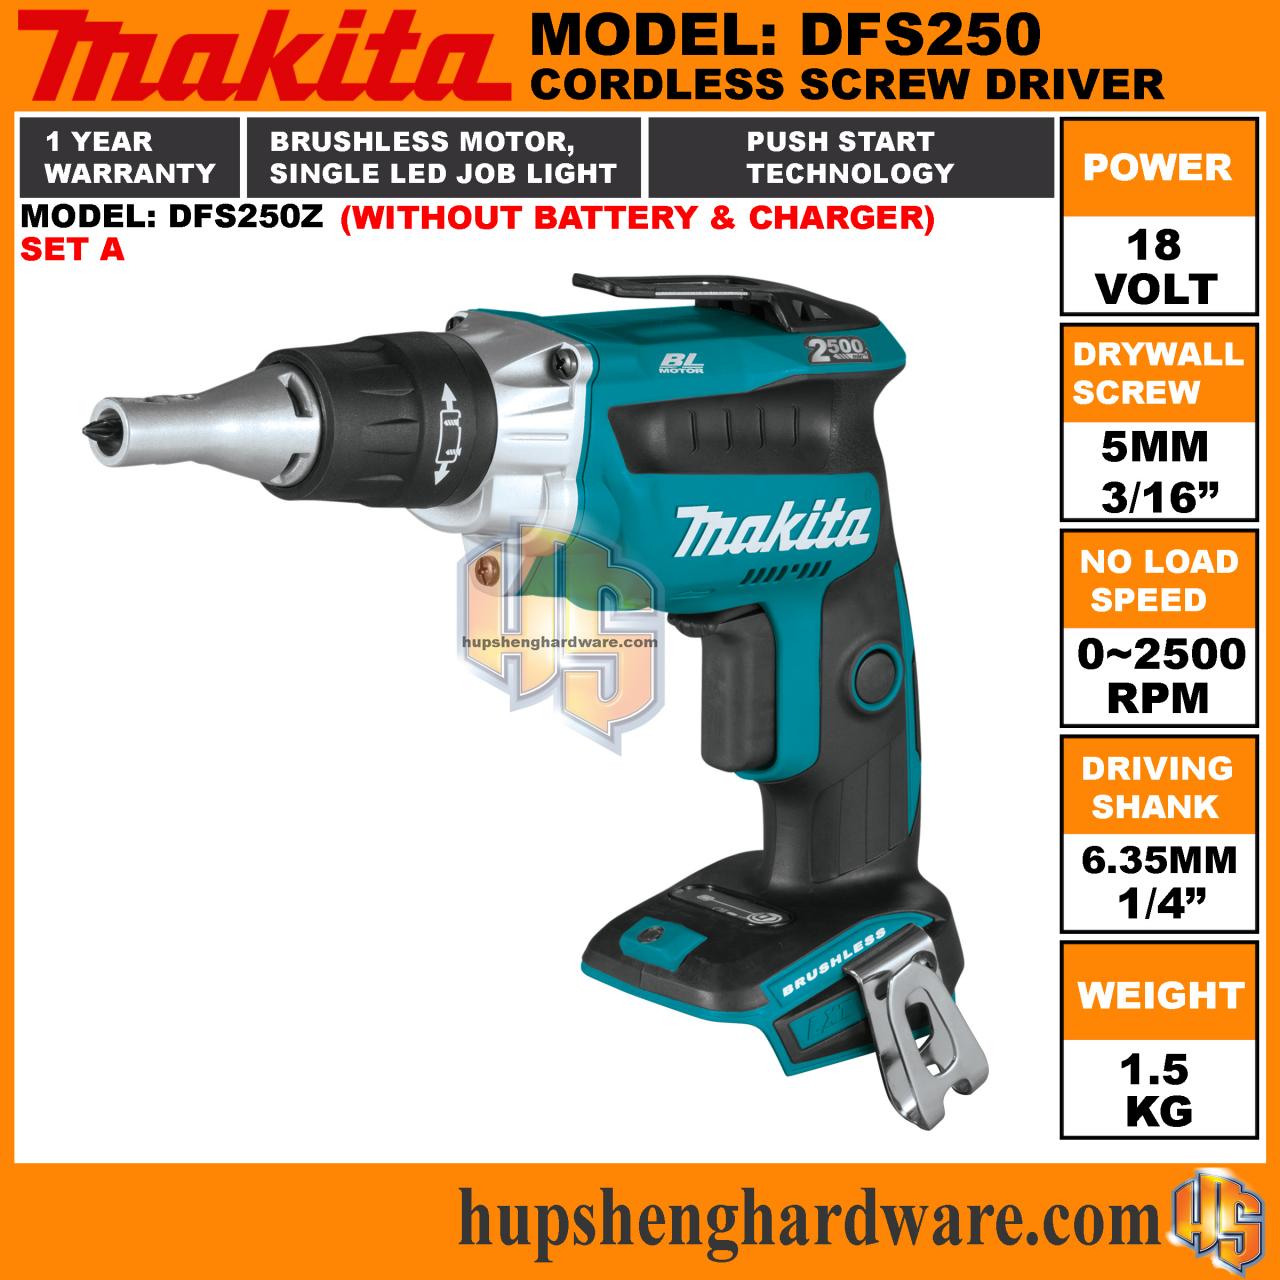 New Makita FS600DZ 18v Brushless Drywall Screwdriver Spotted In Japan -  Tool Craze